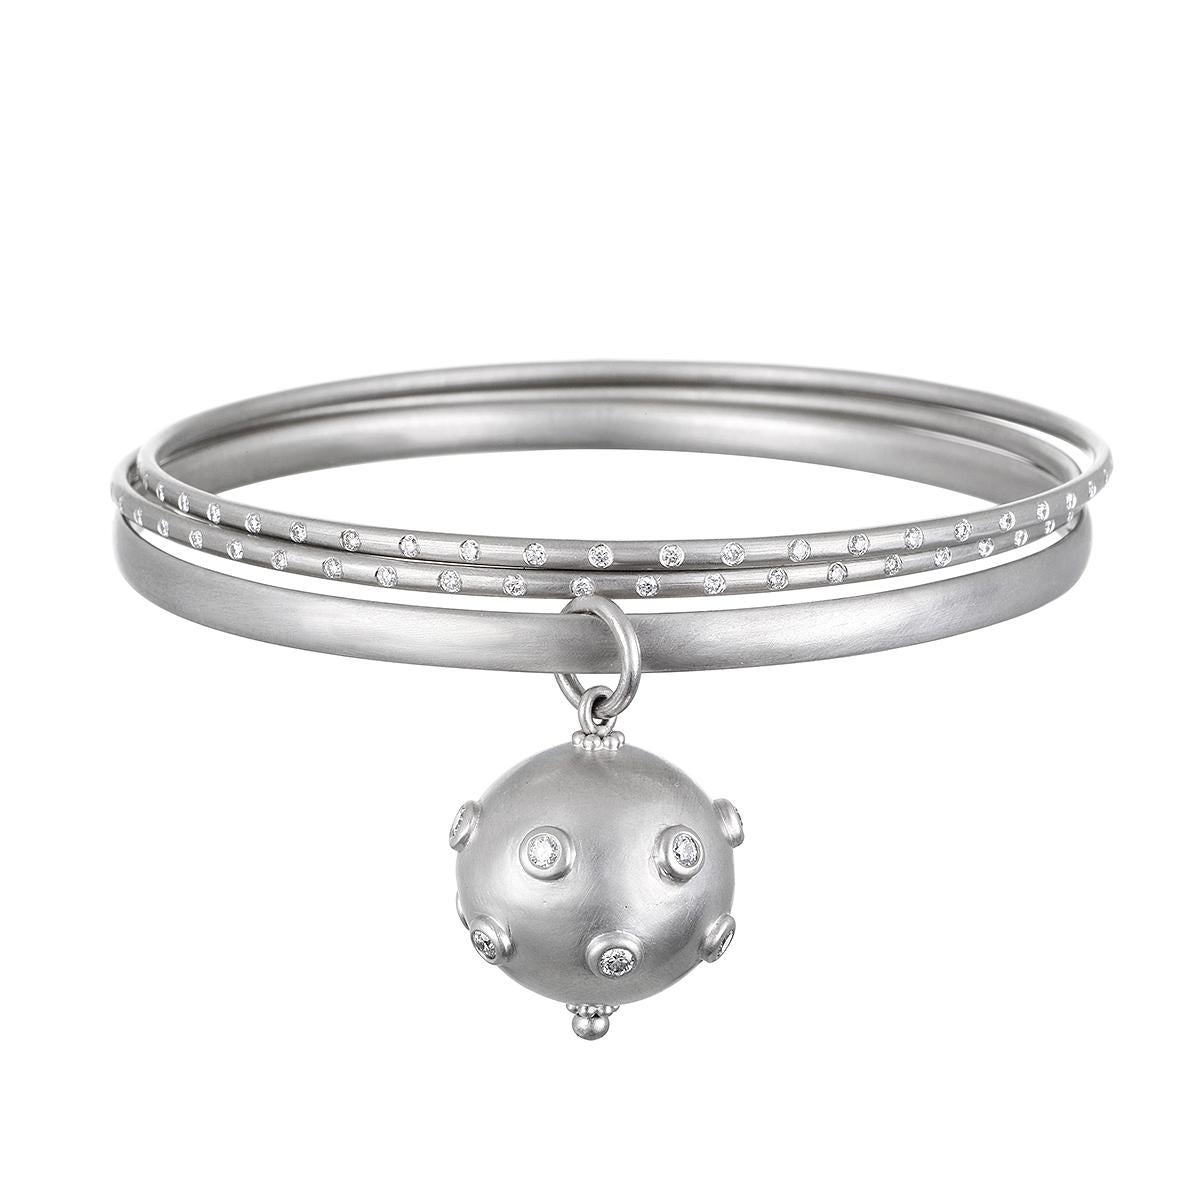 Faye Kim's Matte Platinum Bangle Bracelet with Diamond Ball Charm is both timeless and modern, making it perfect for both everyday wear and special occasions. The charm, embellished with round diamonds, has a nice heft and feel, and slides